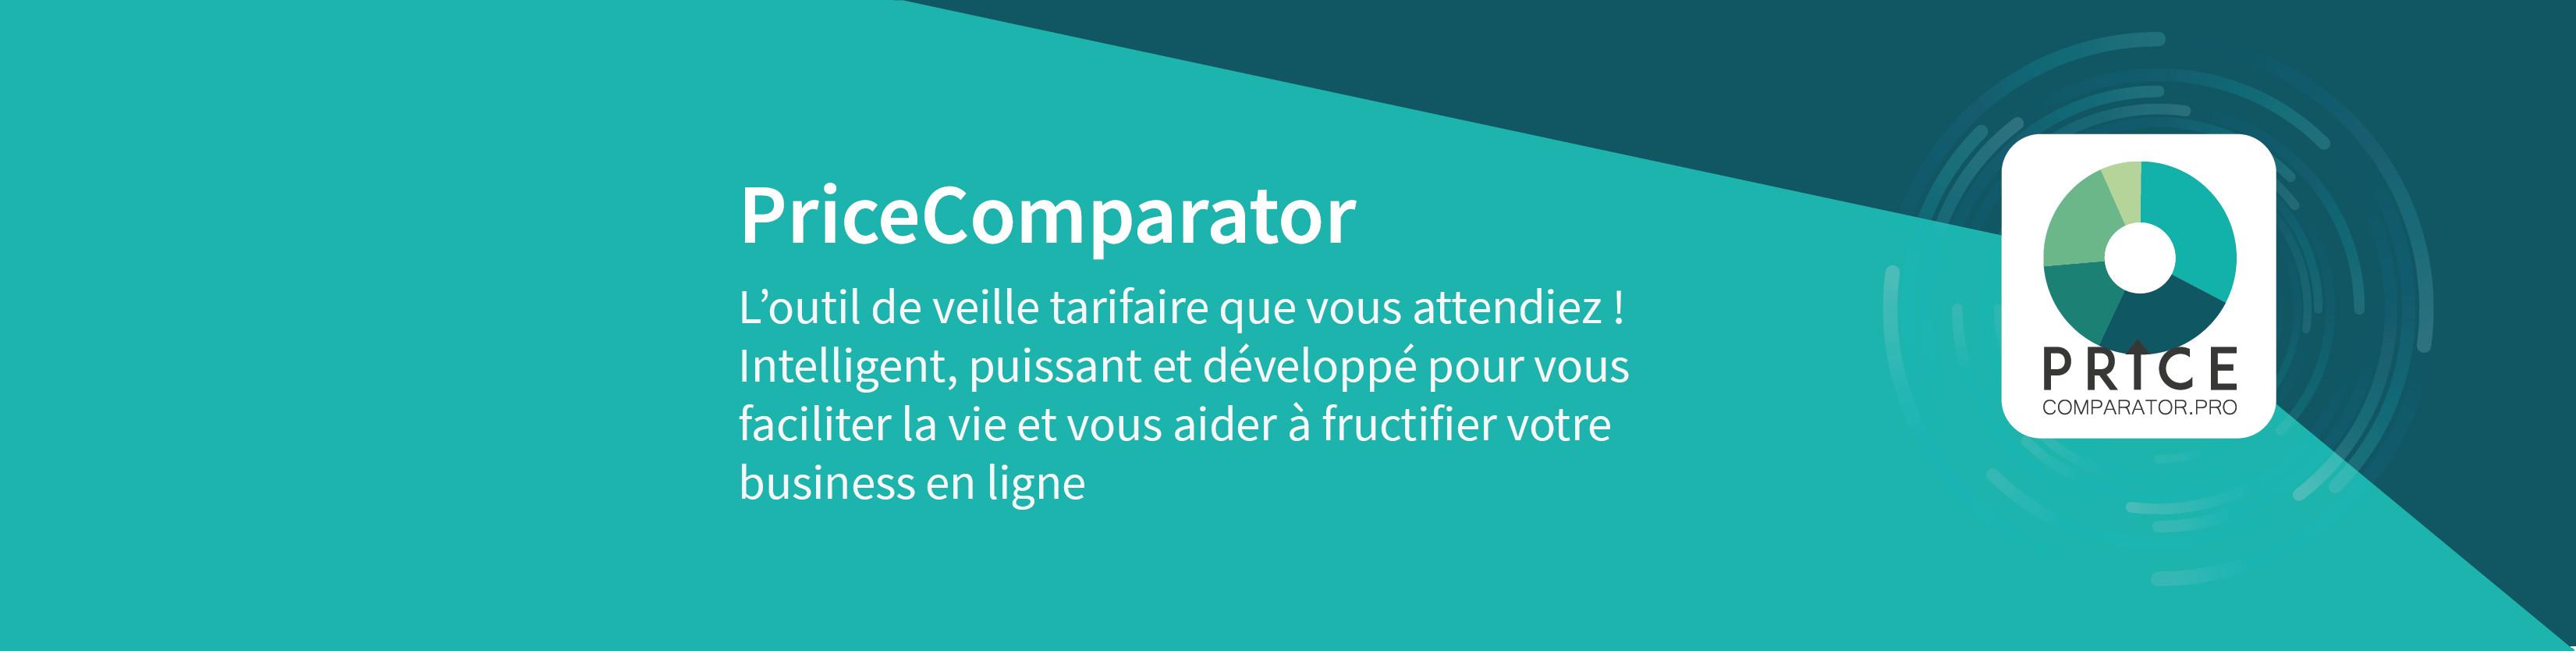 Review PriceComparator: BtoB pricing and competitive intelligence - Appvizer